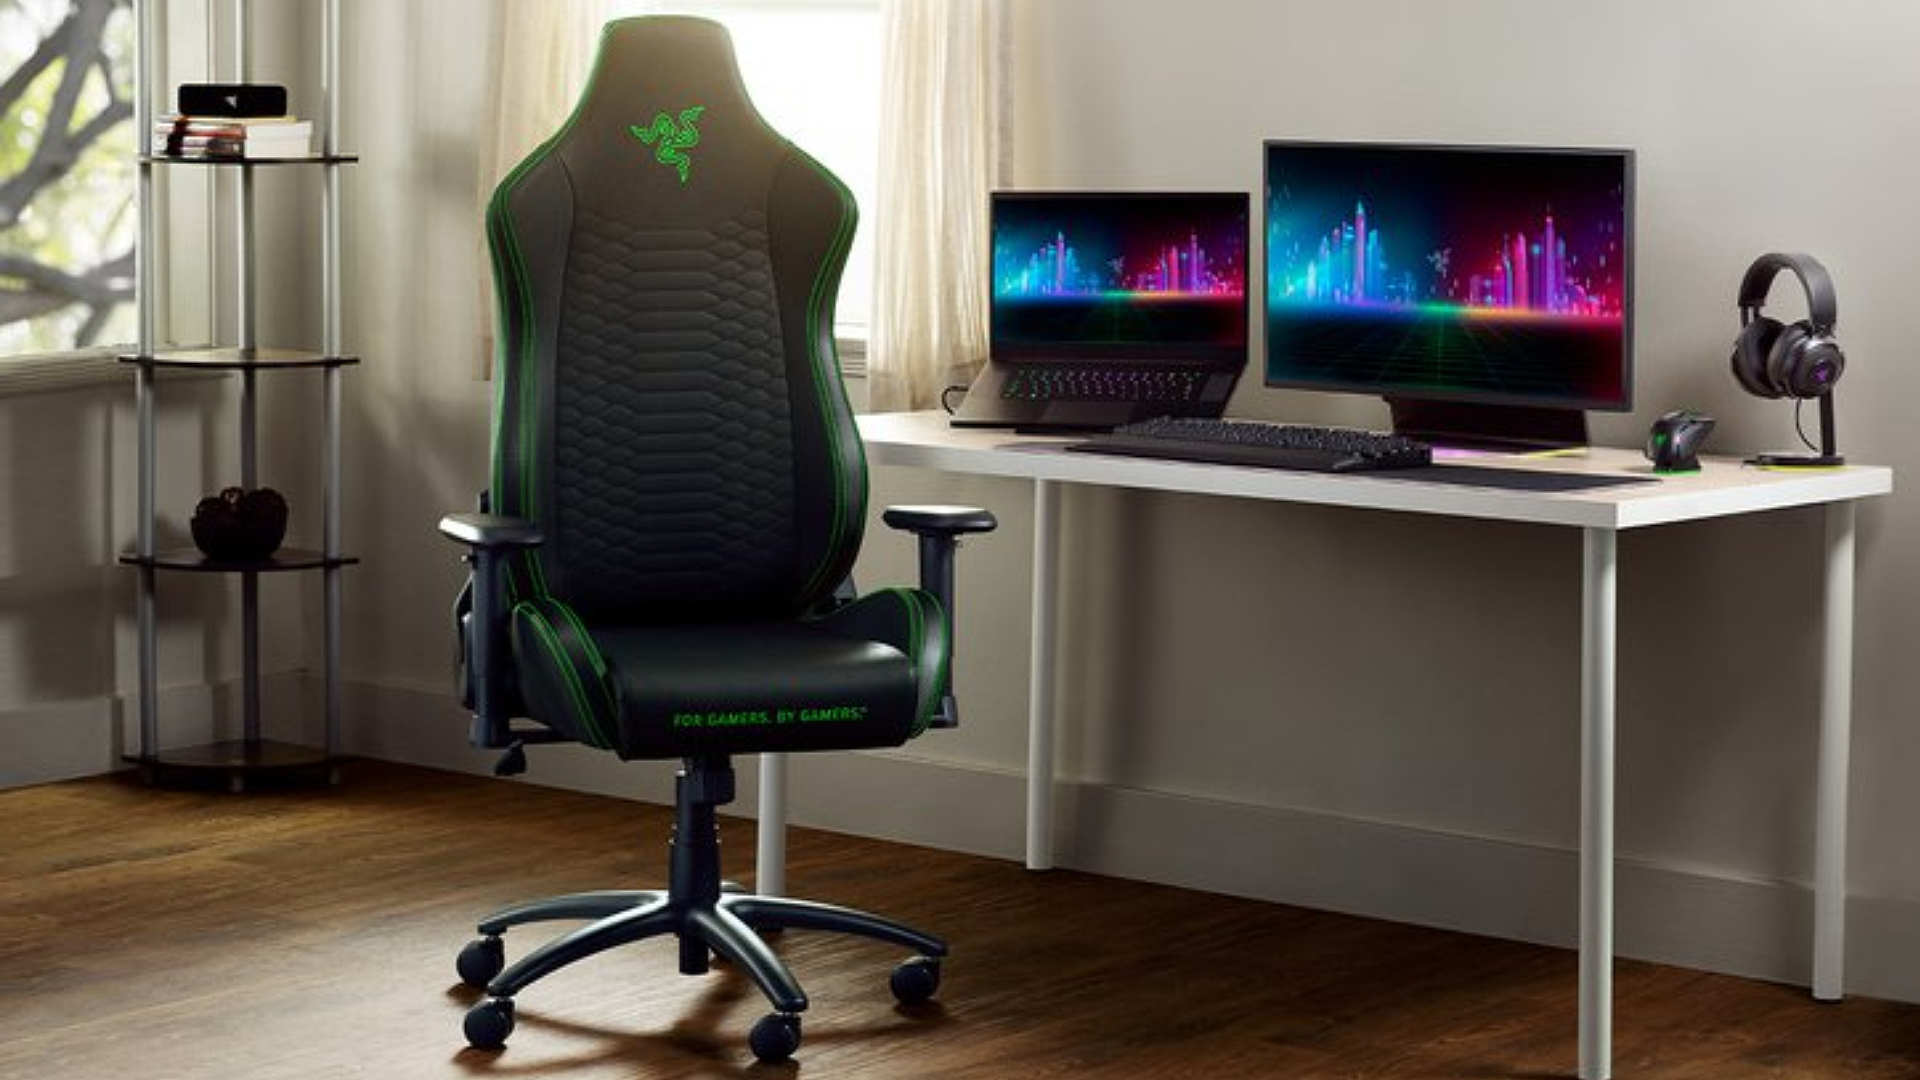 Grab 37% off the Razer Iskur X gaming chair on Amazon